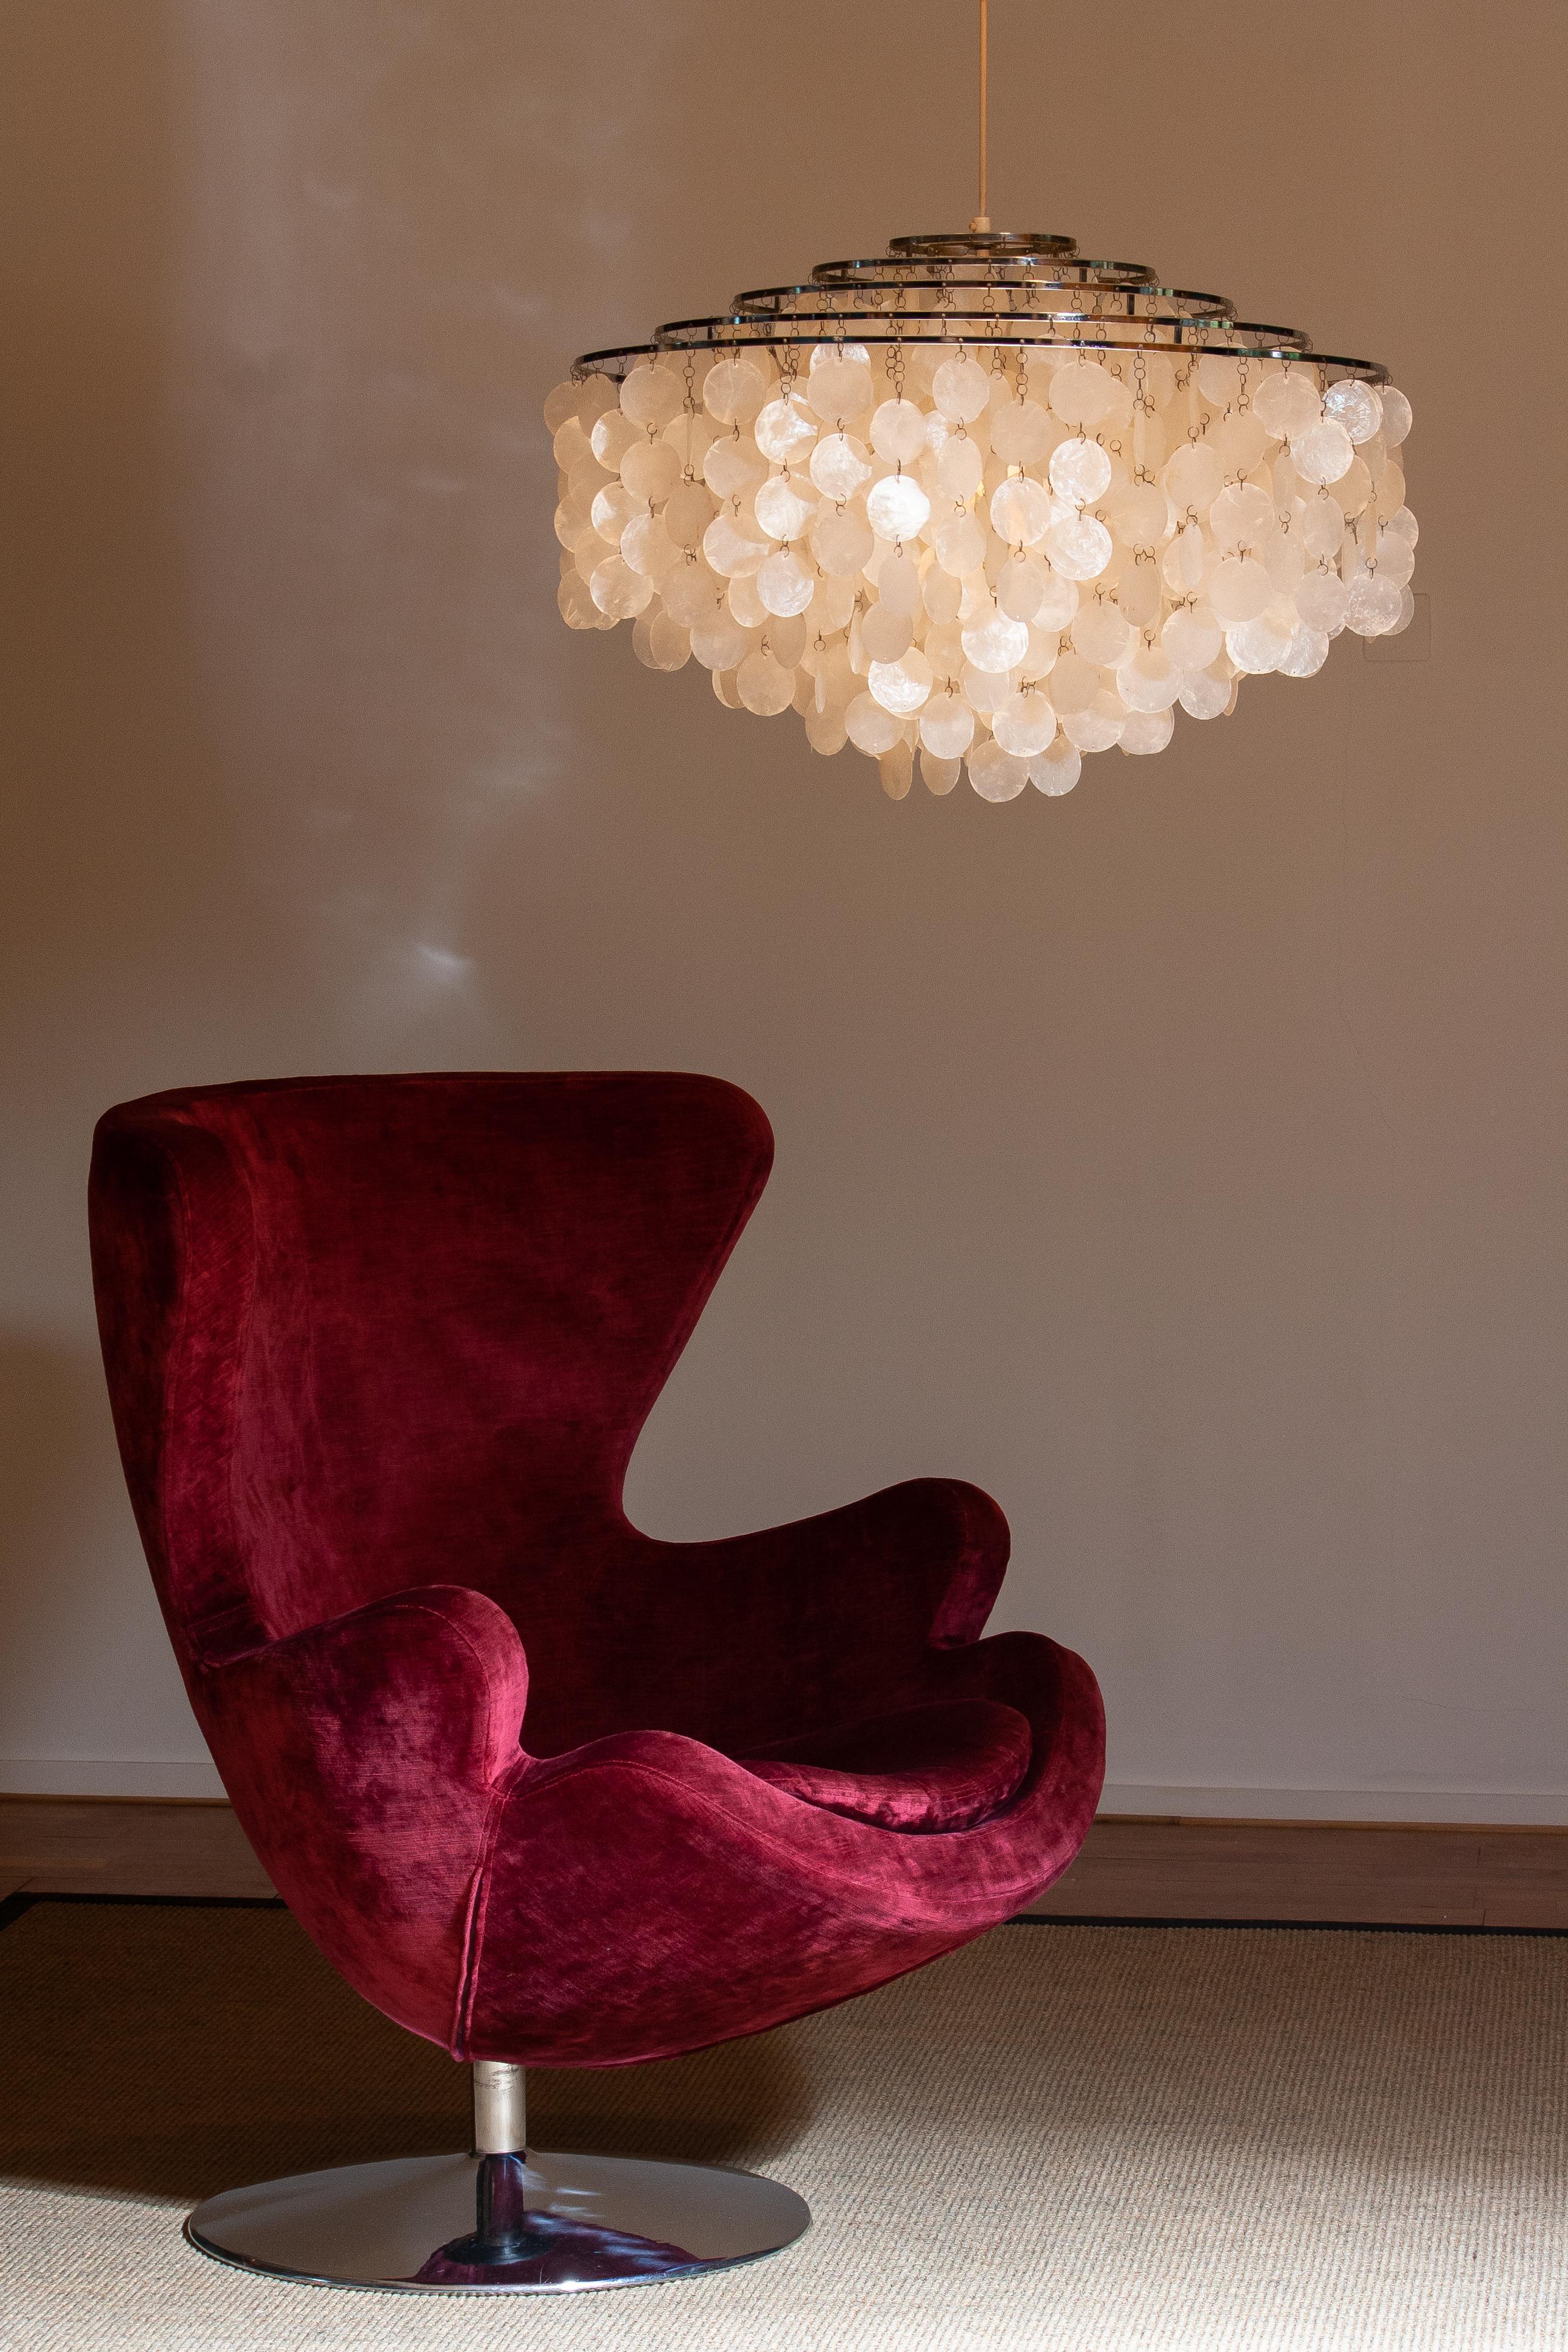 Pair of Extra Large Capiz Shell Chandeliers by Verner Panton for Luber AG. Swiss 5